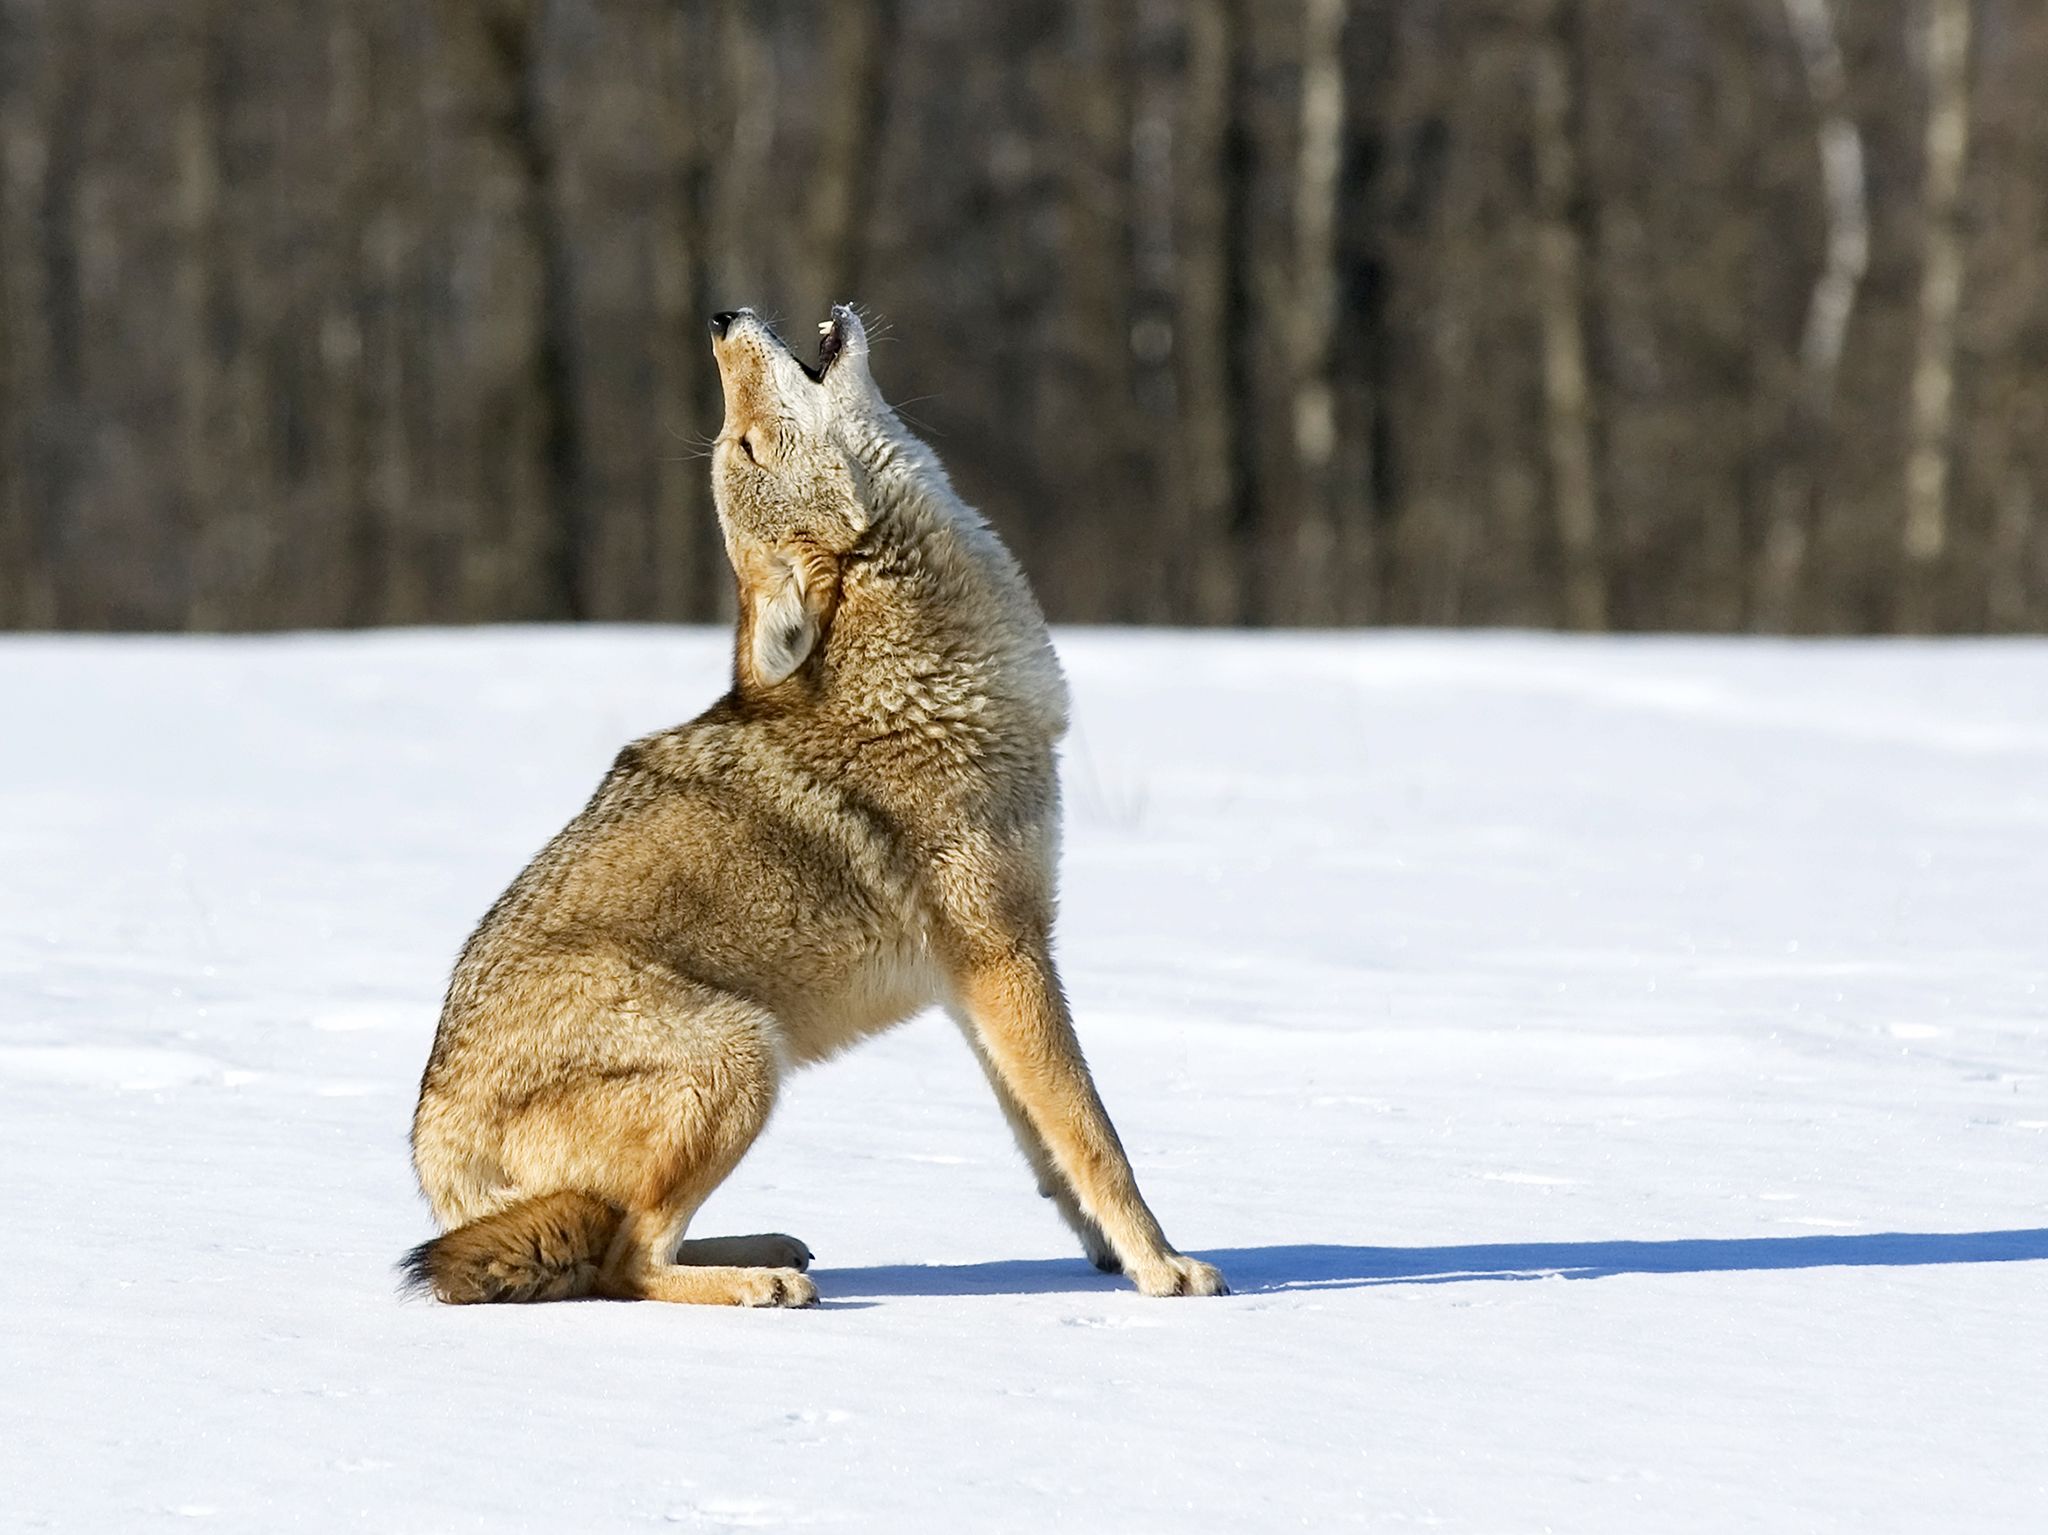 A coyote howls. The coyote's vocalizations are one of the few wild animals commonly heard; the... [Photo of the day - March 2020]